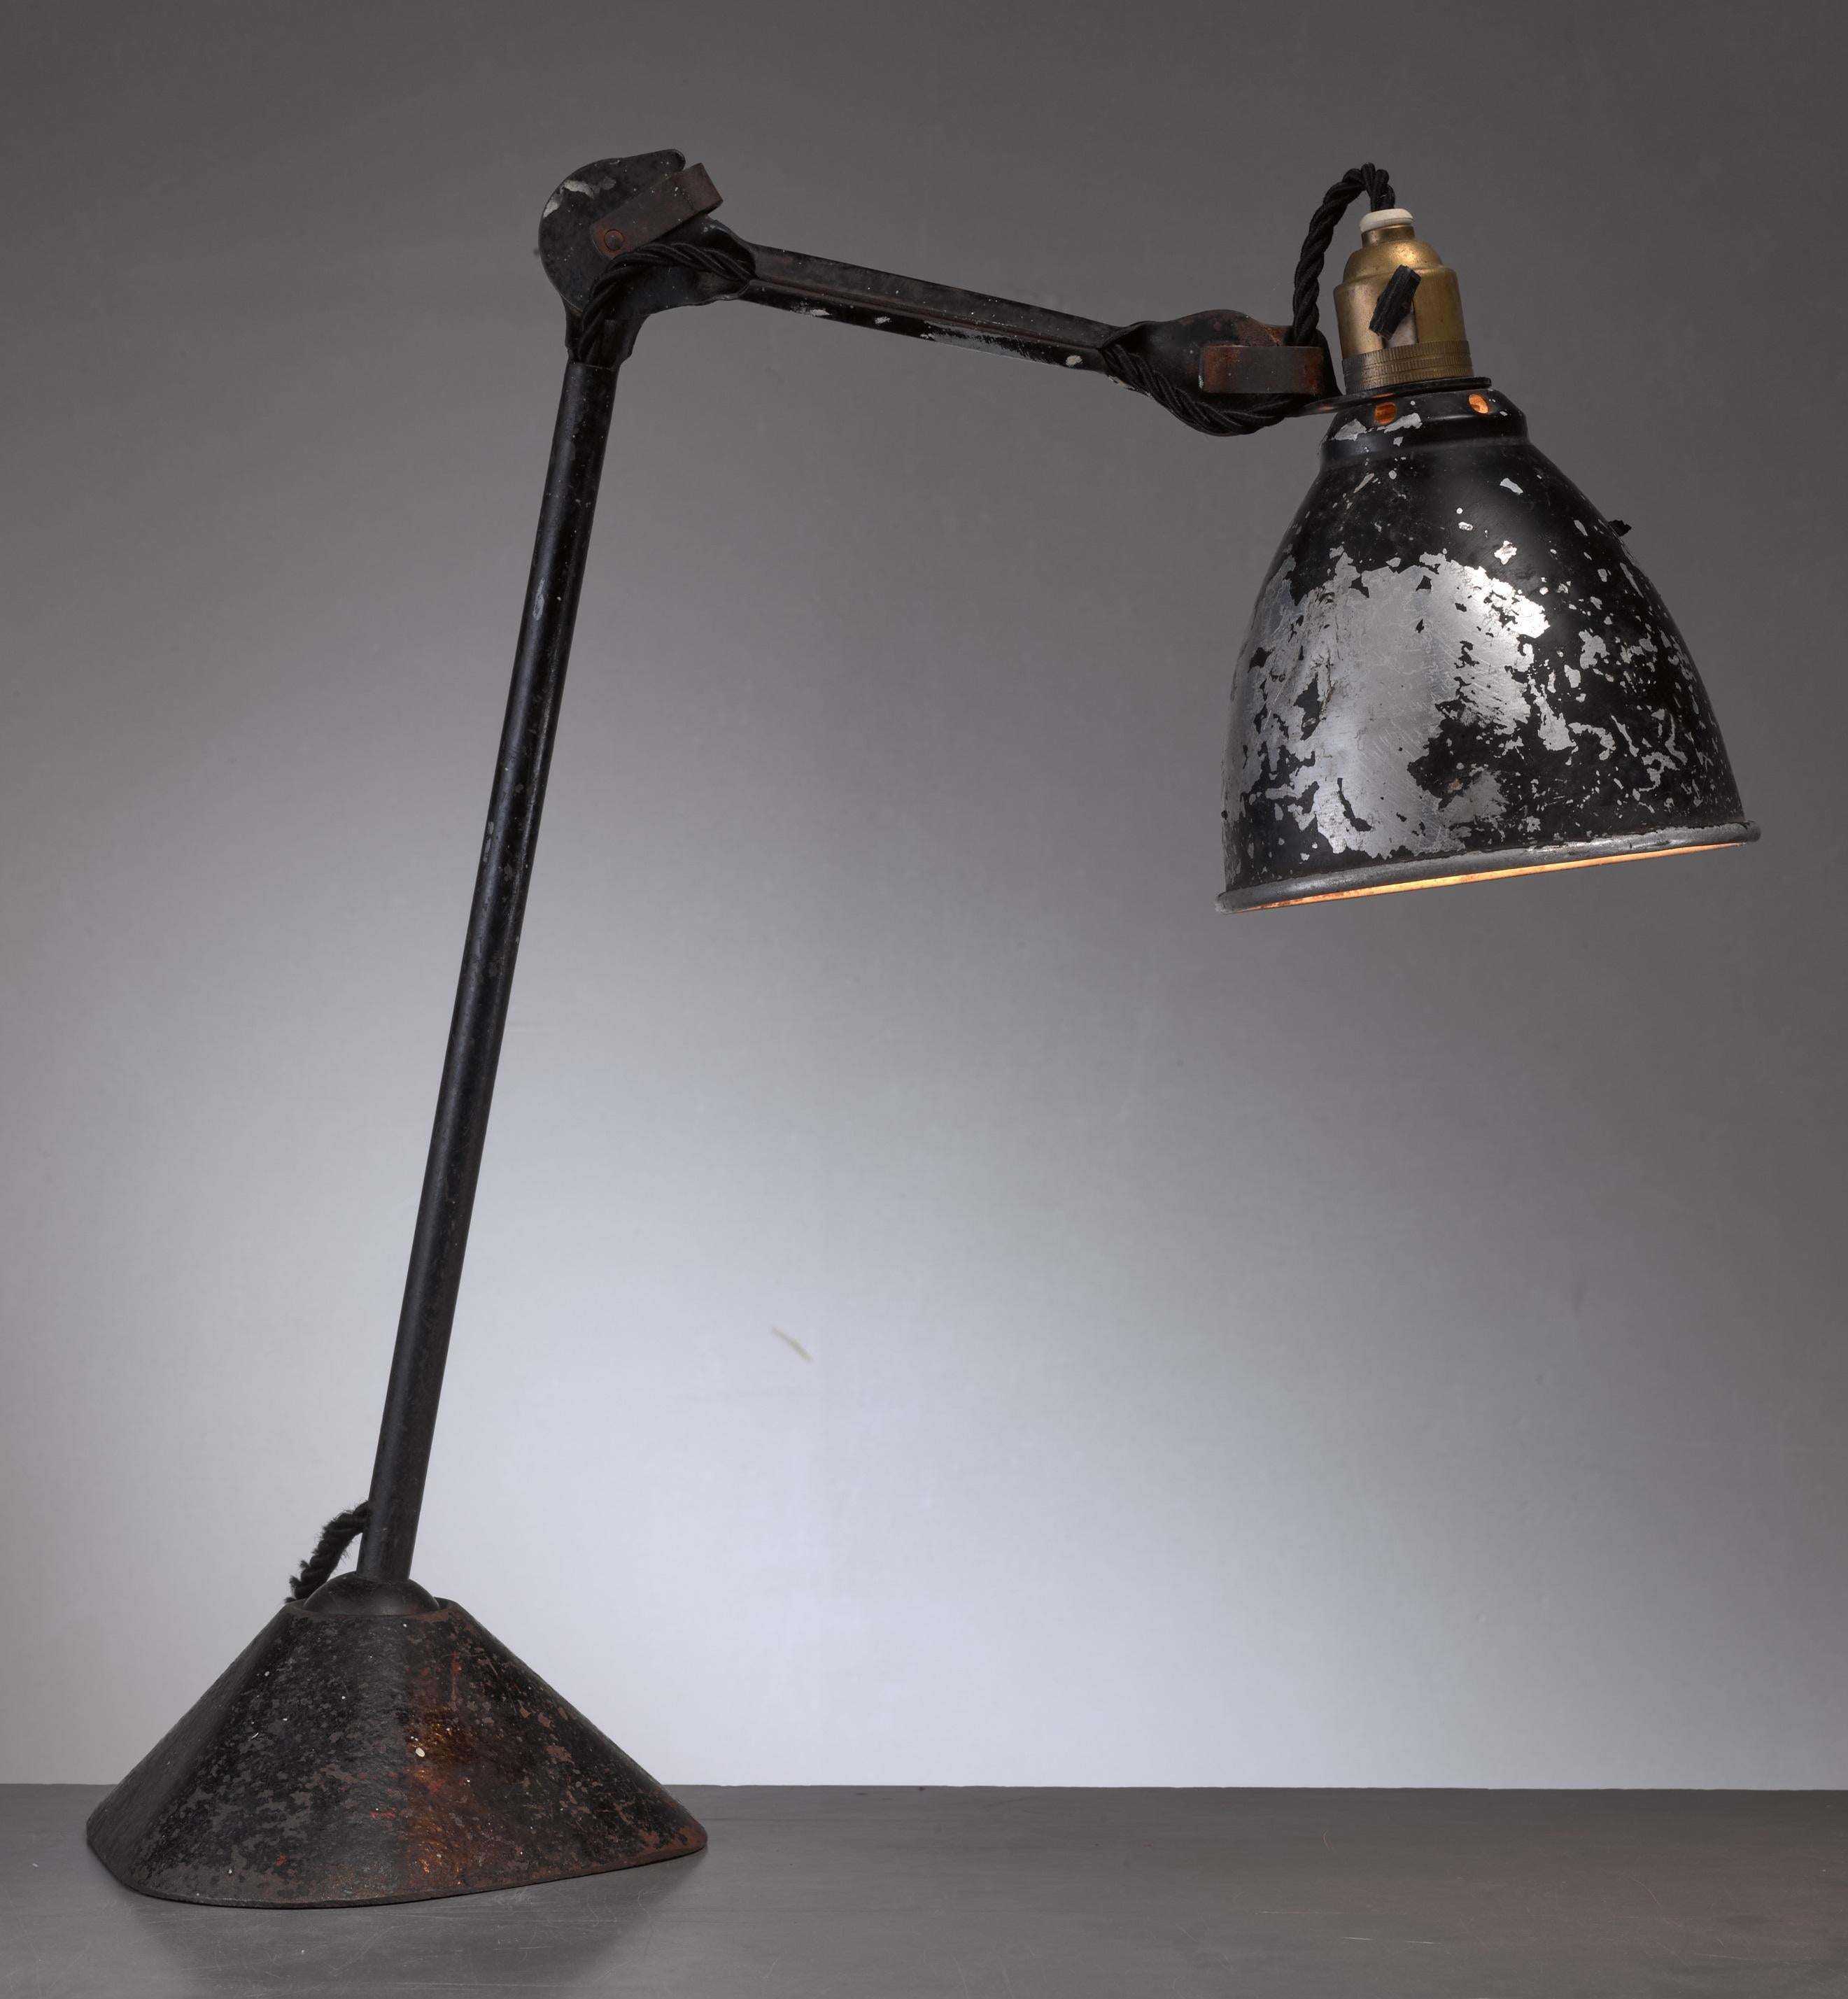 French Lampe Gras Table Lamp by Didier des Gachons & Ravel, France, 1920s For Sale